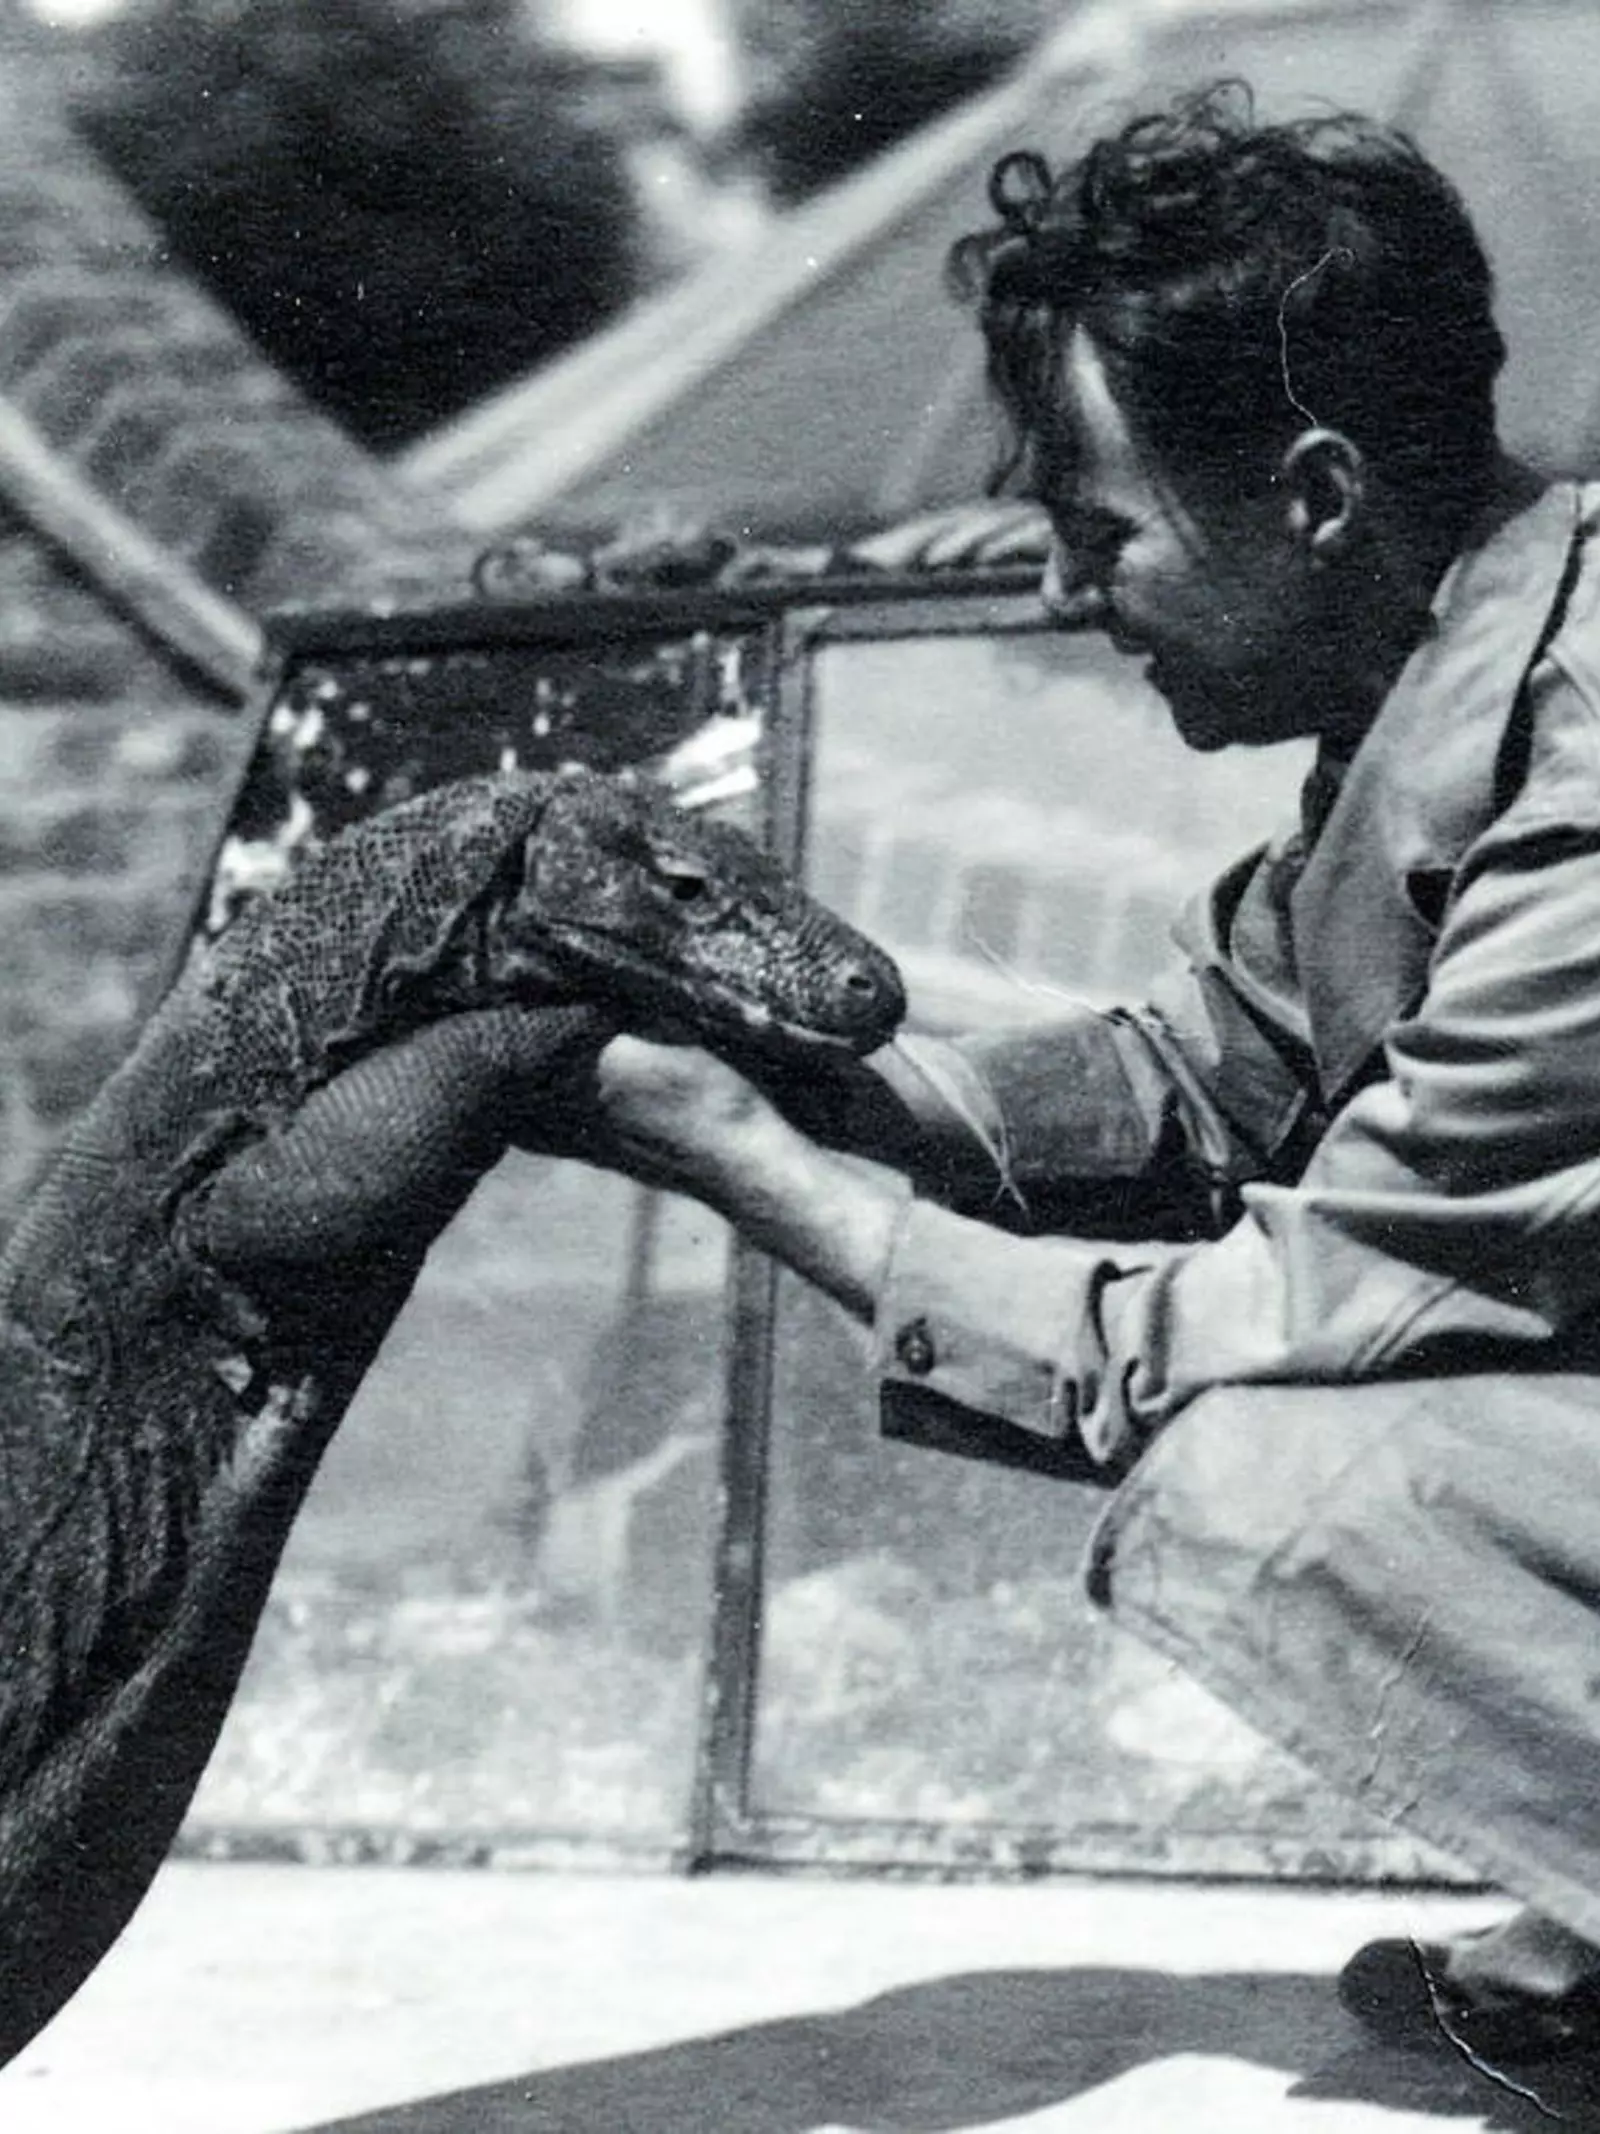 Komodo dragon ‘Sumbawa’ with keeper H. Alec Budd (1928). The scar on the reptile's neck was caused by a crocodile bite.